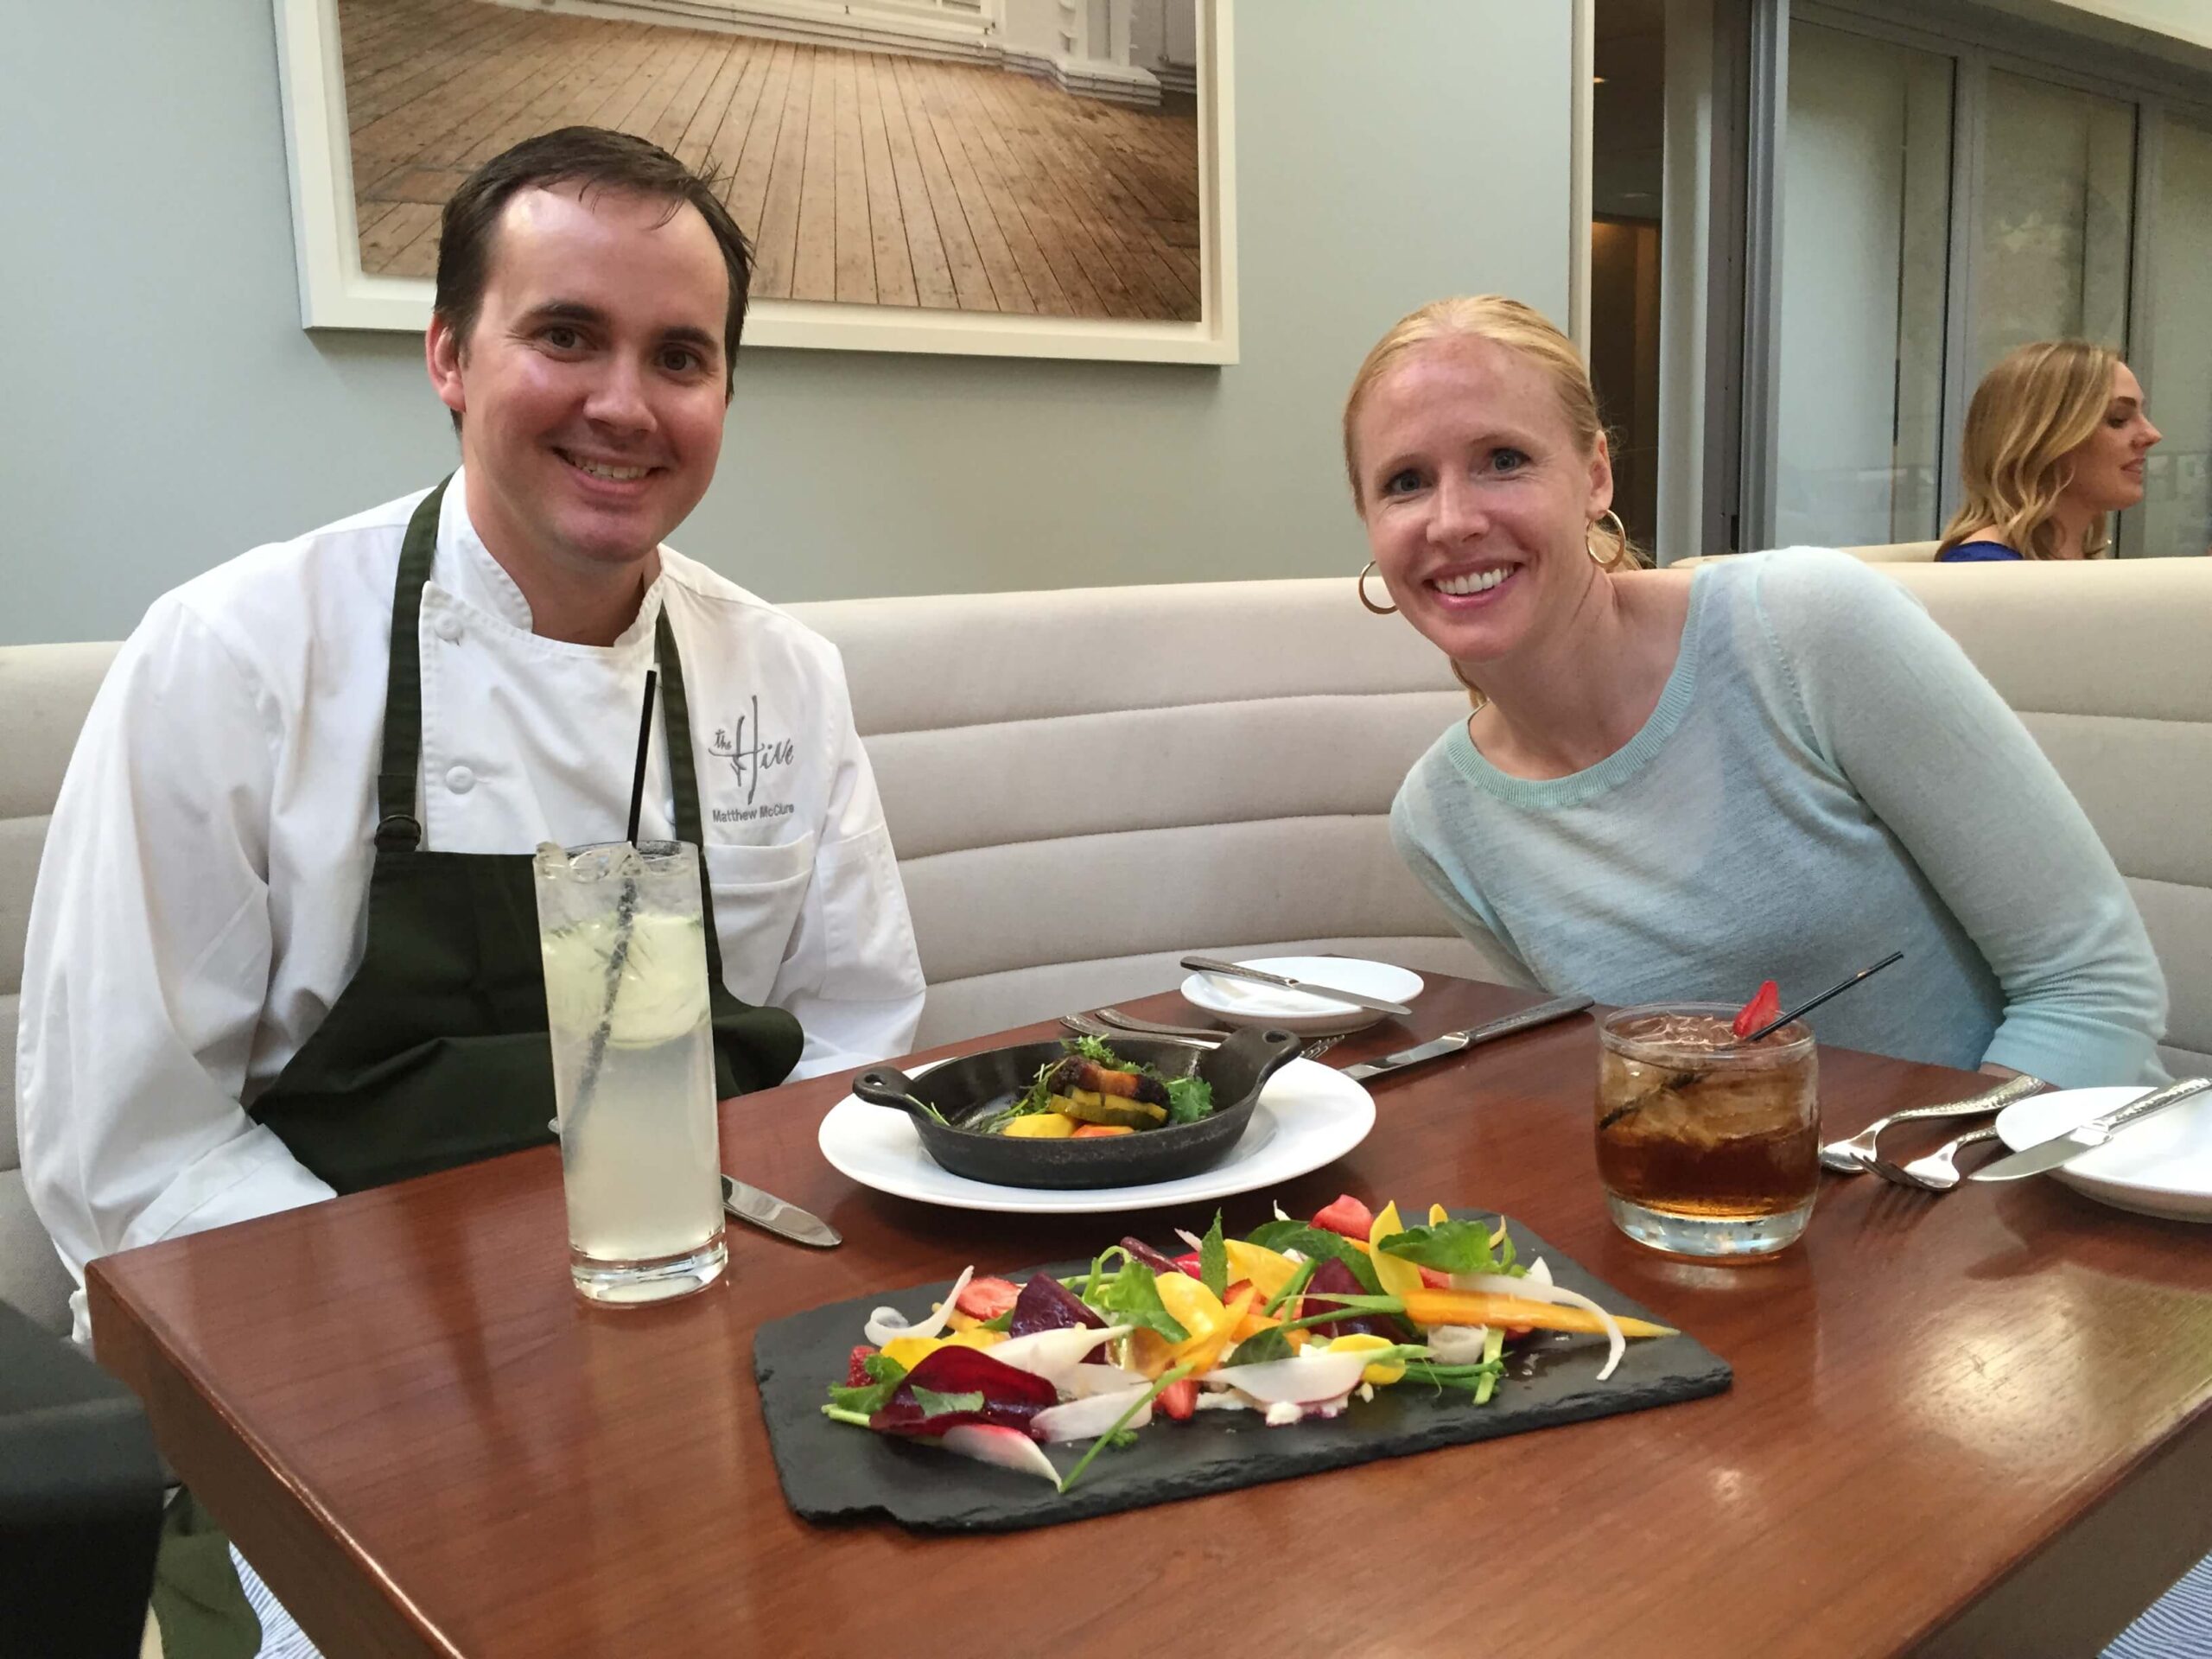 Darley Newman tried Smoked Pork Belly with Chef Matthew McClure